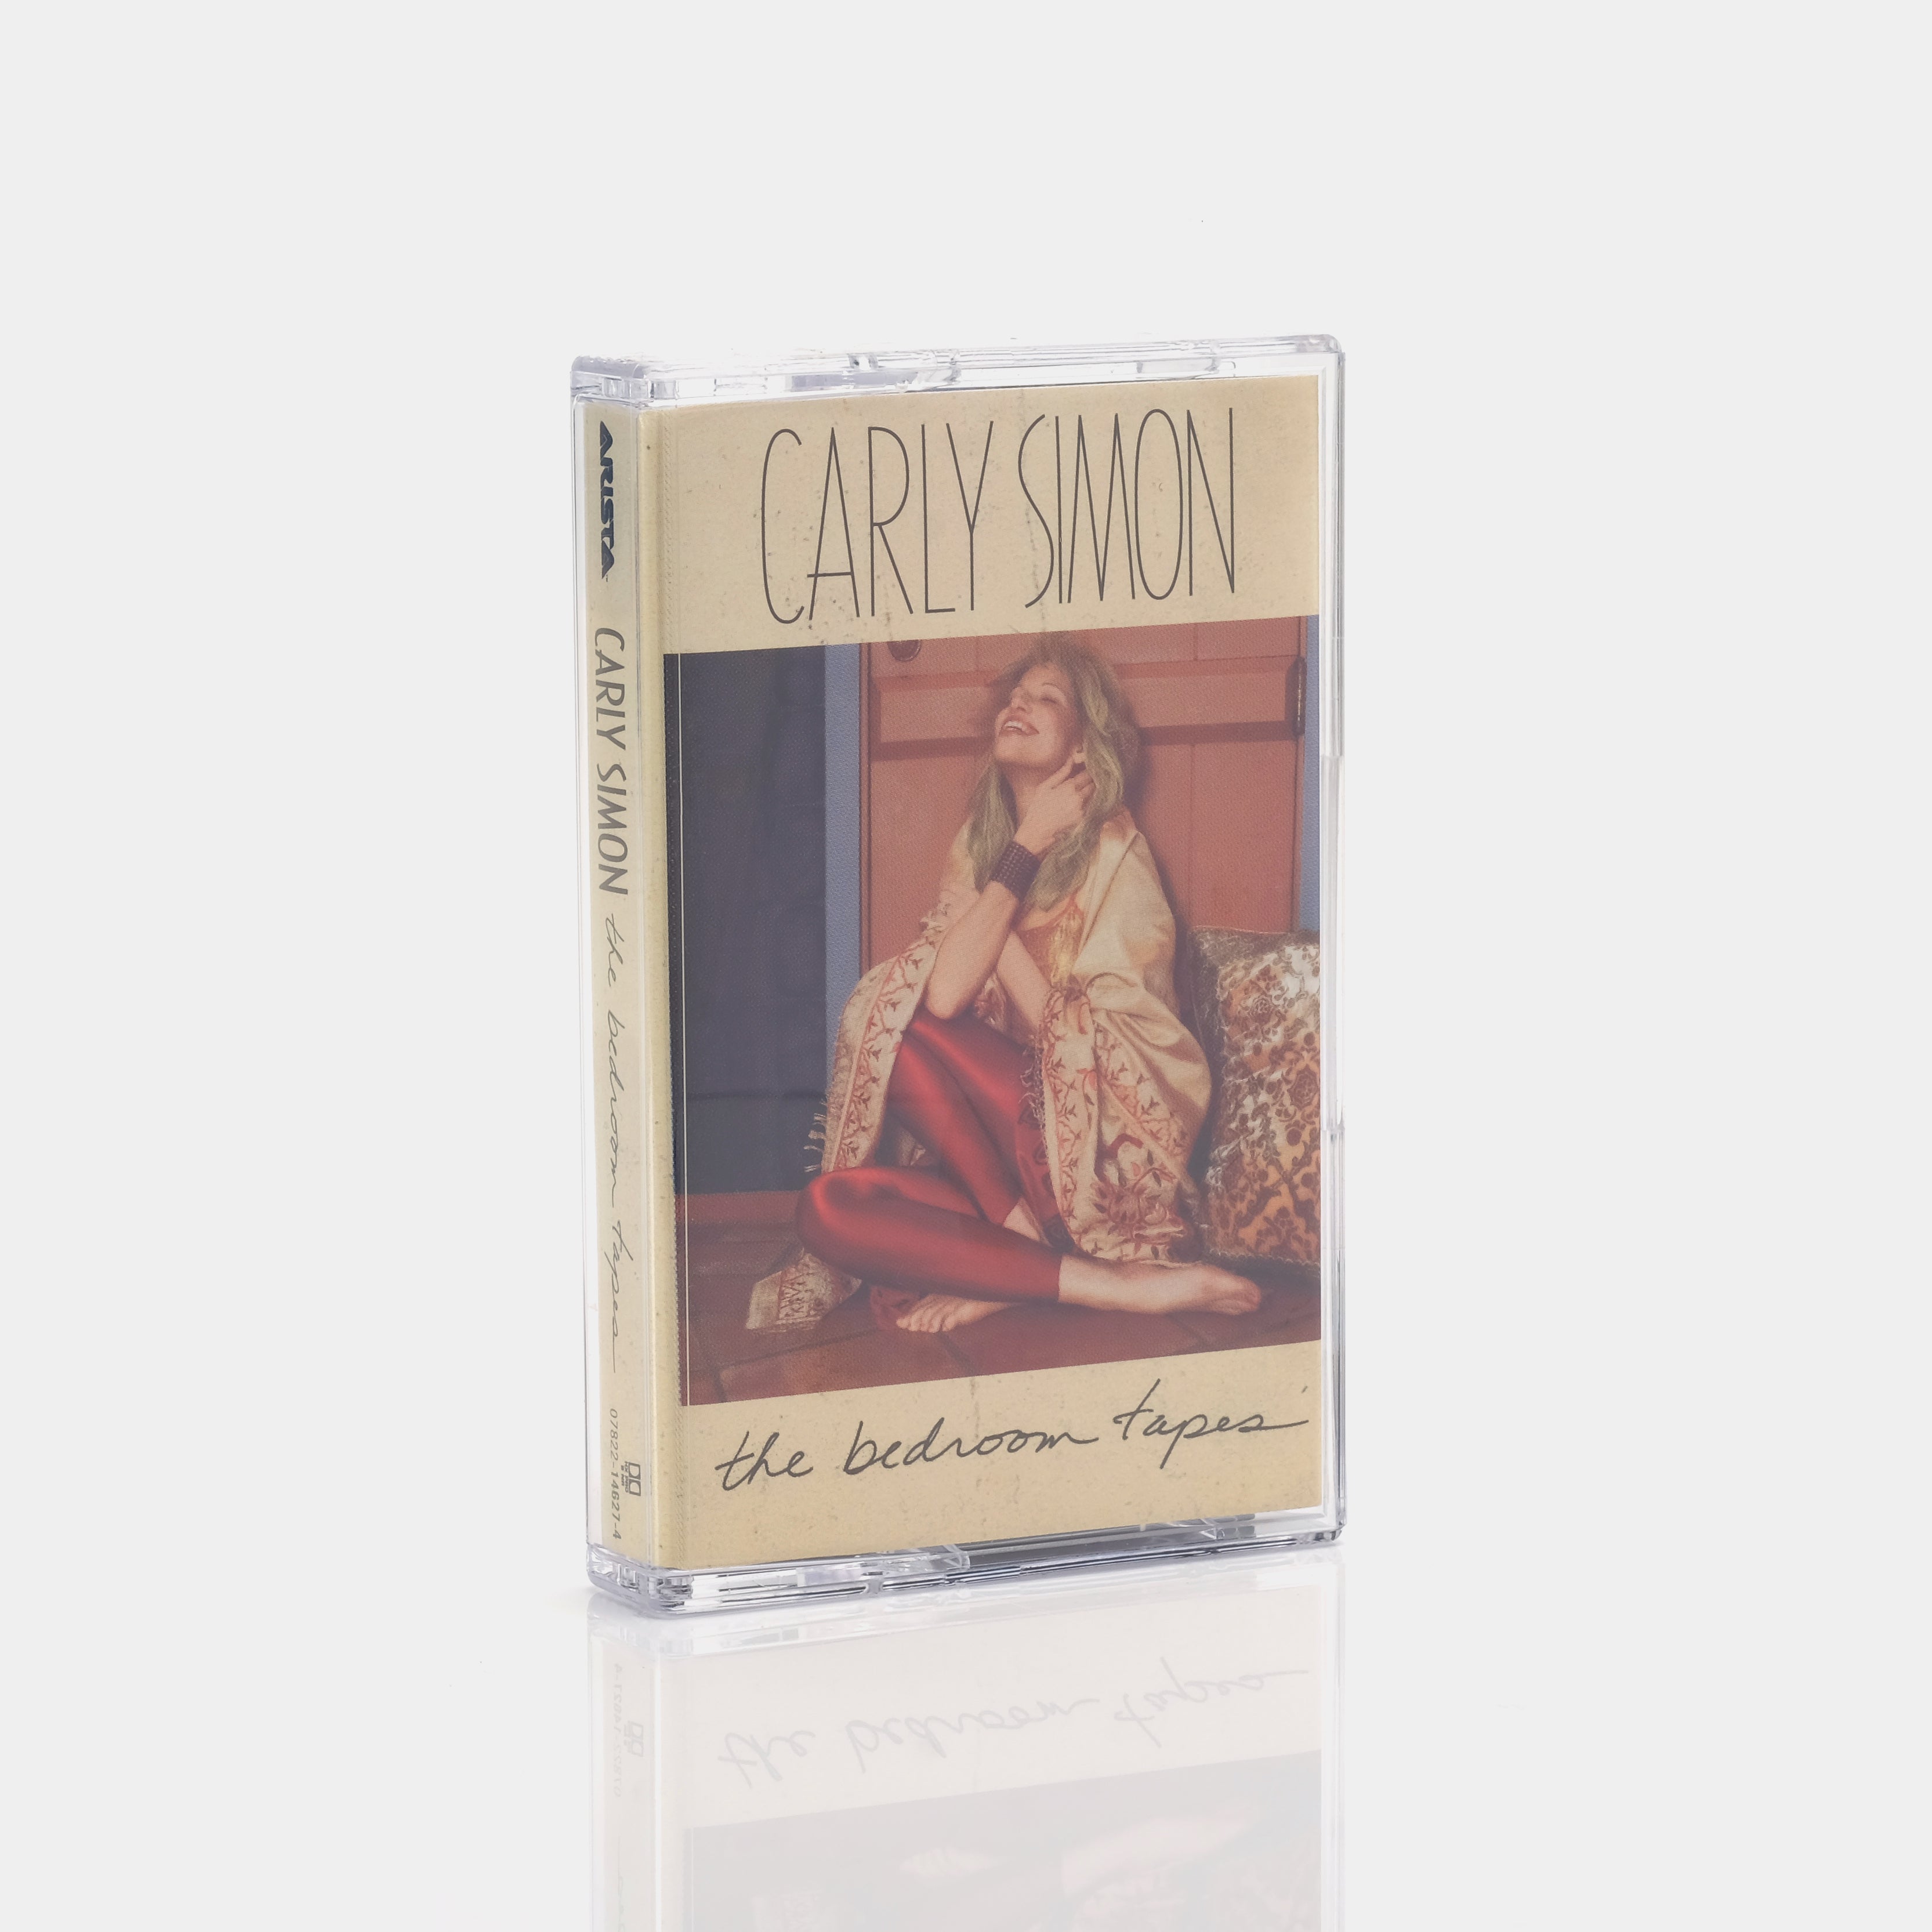 Carly Simon - The Bedroom Tapes Cassette Tape